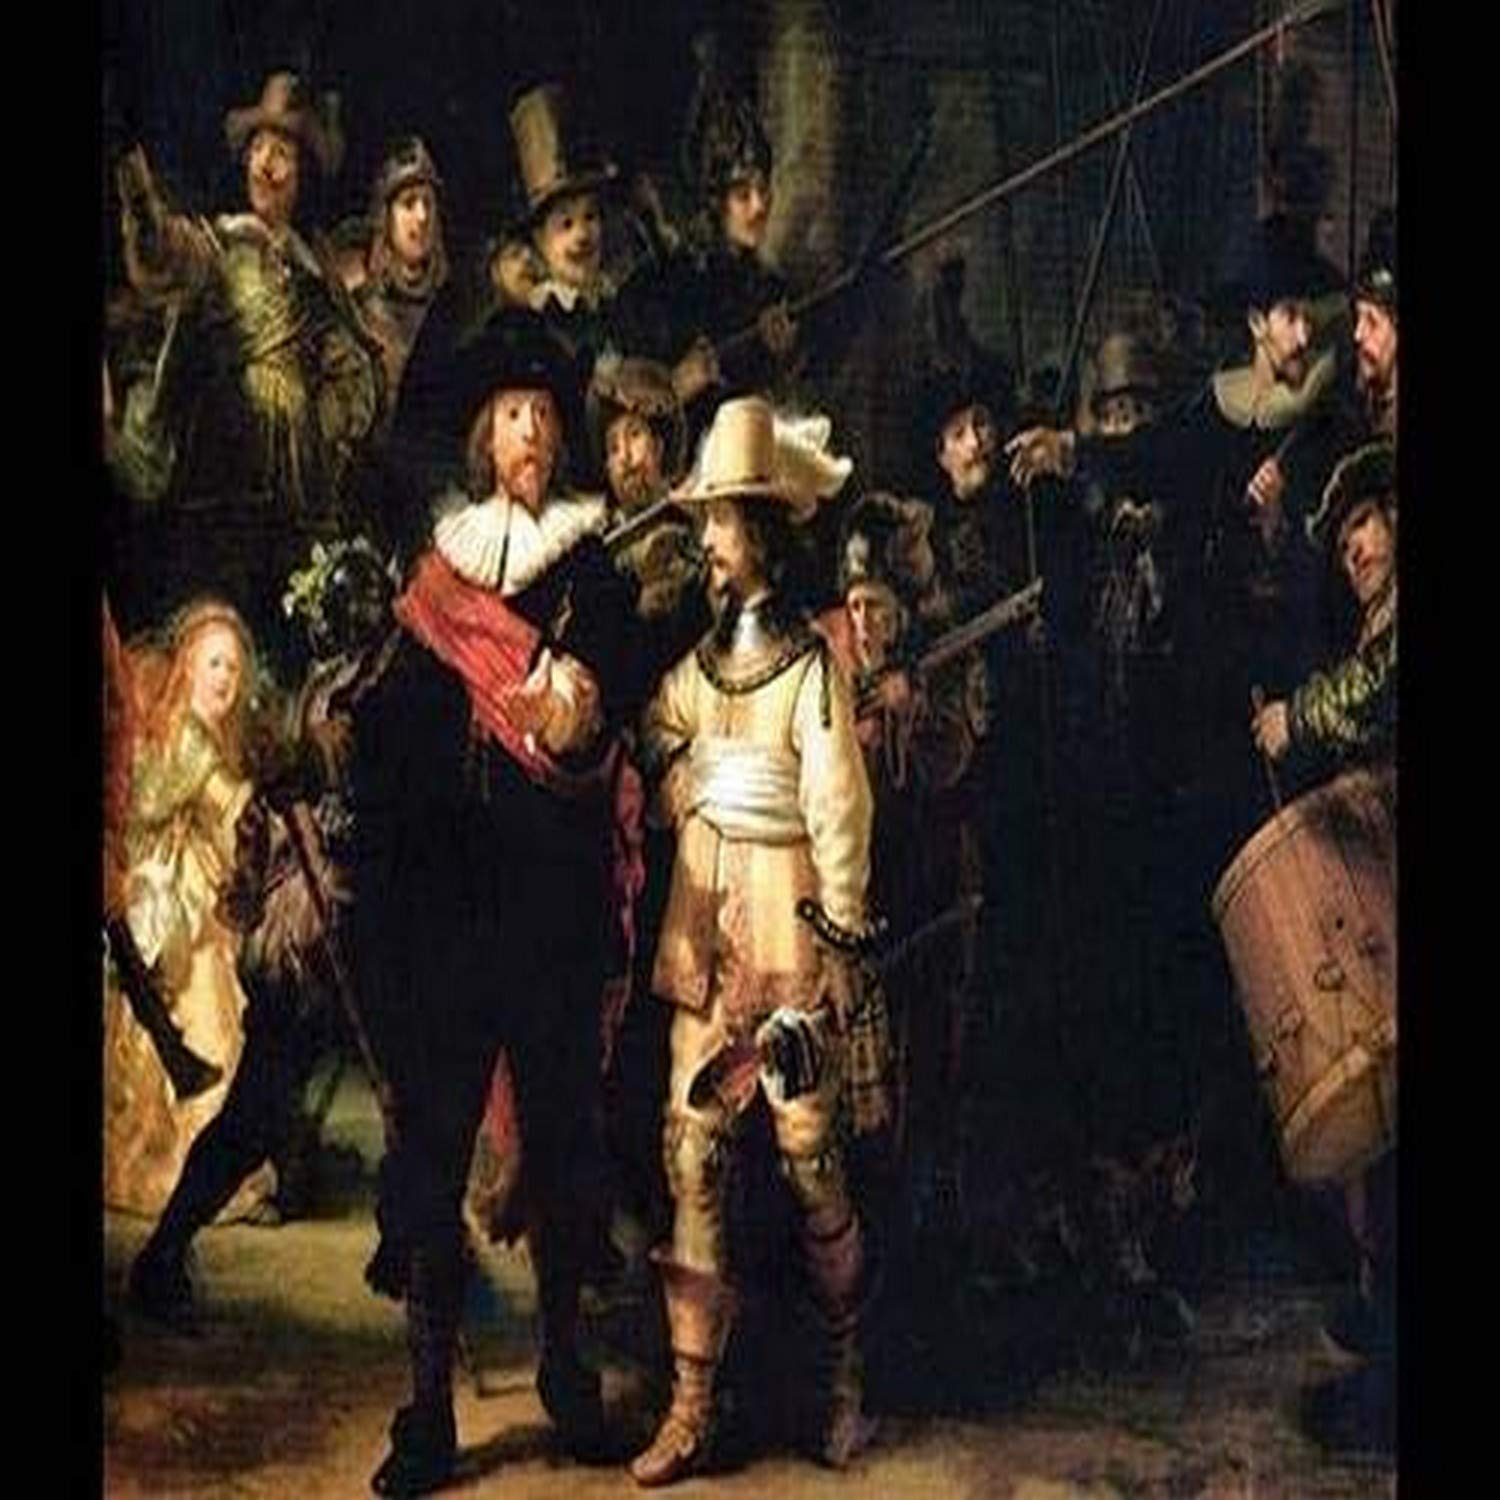 The Night Watch detail Vintage art reproduction by Buyenlarge One of many rare and wonderful images brought forward in time I hope they bring you pleasure each and every time you look